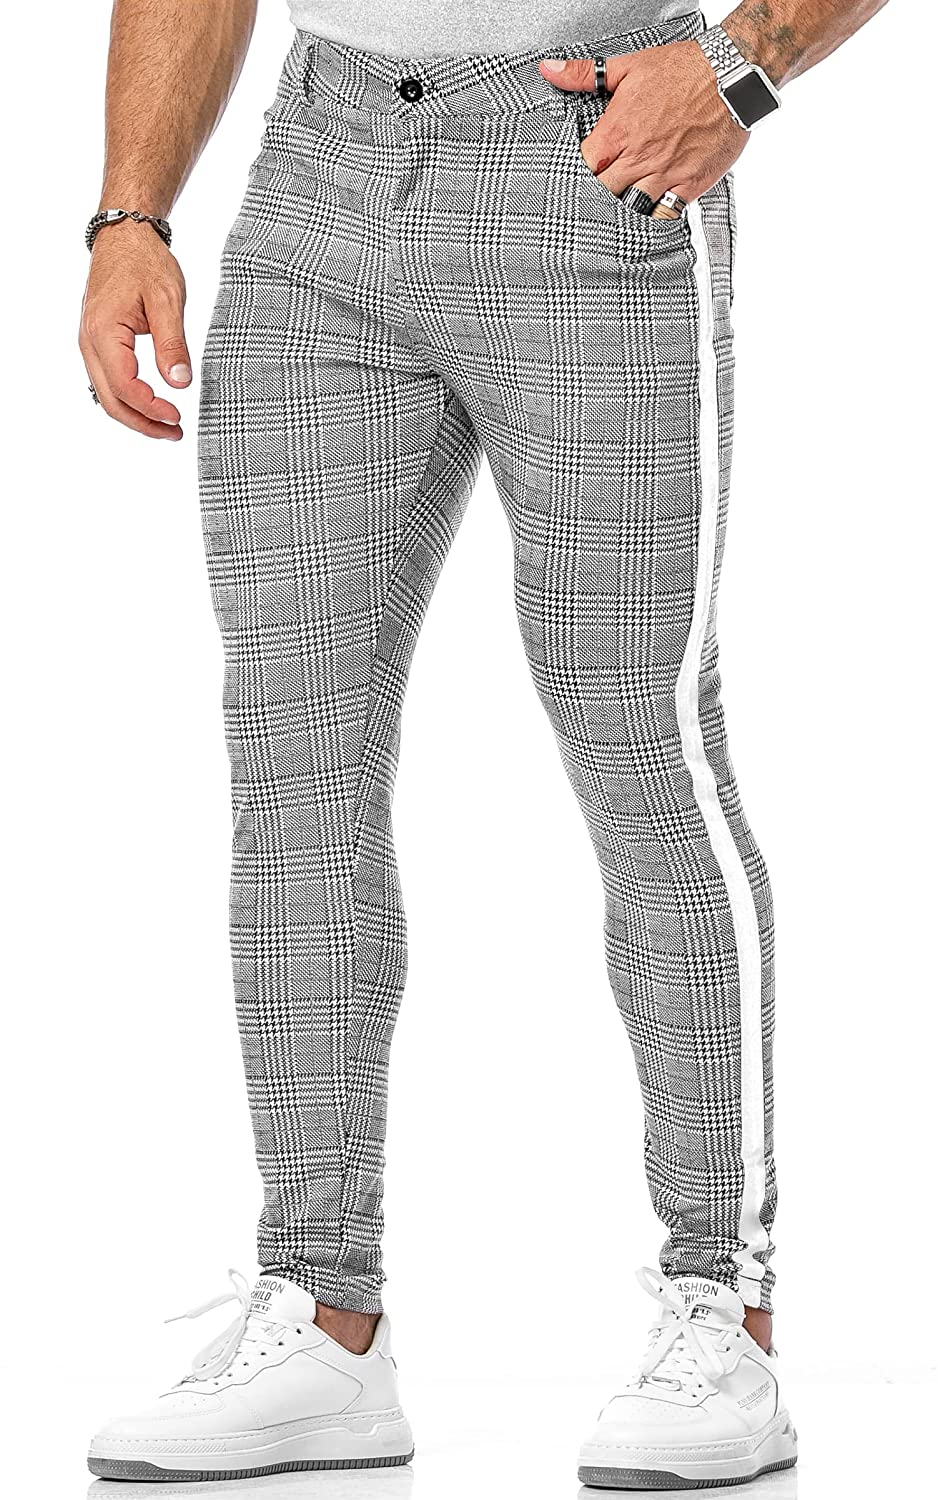 Mens Plaid Pants Slim Tapered Fit Casual Stretch Flat-Front Expandable  Waist Che